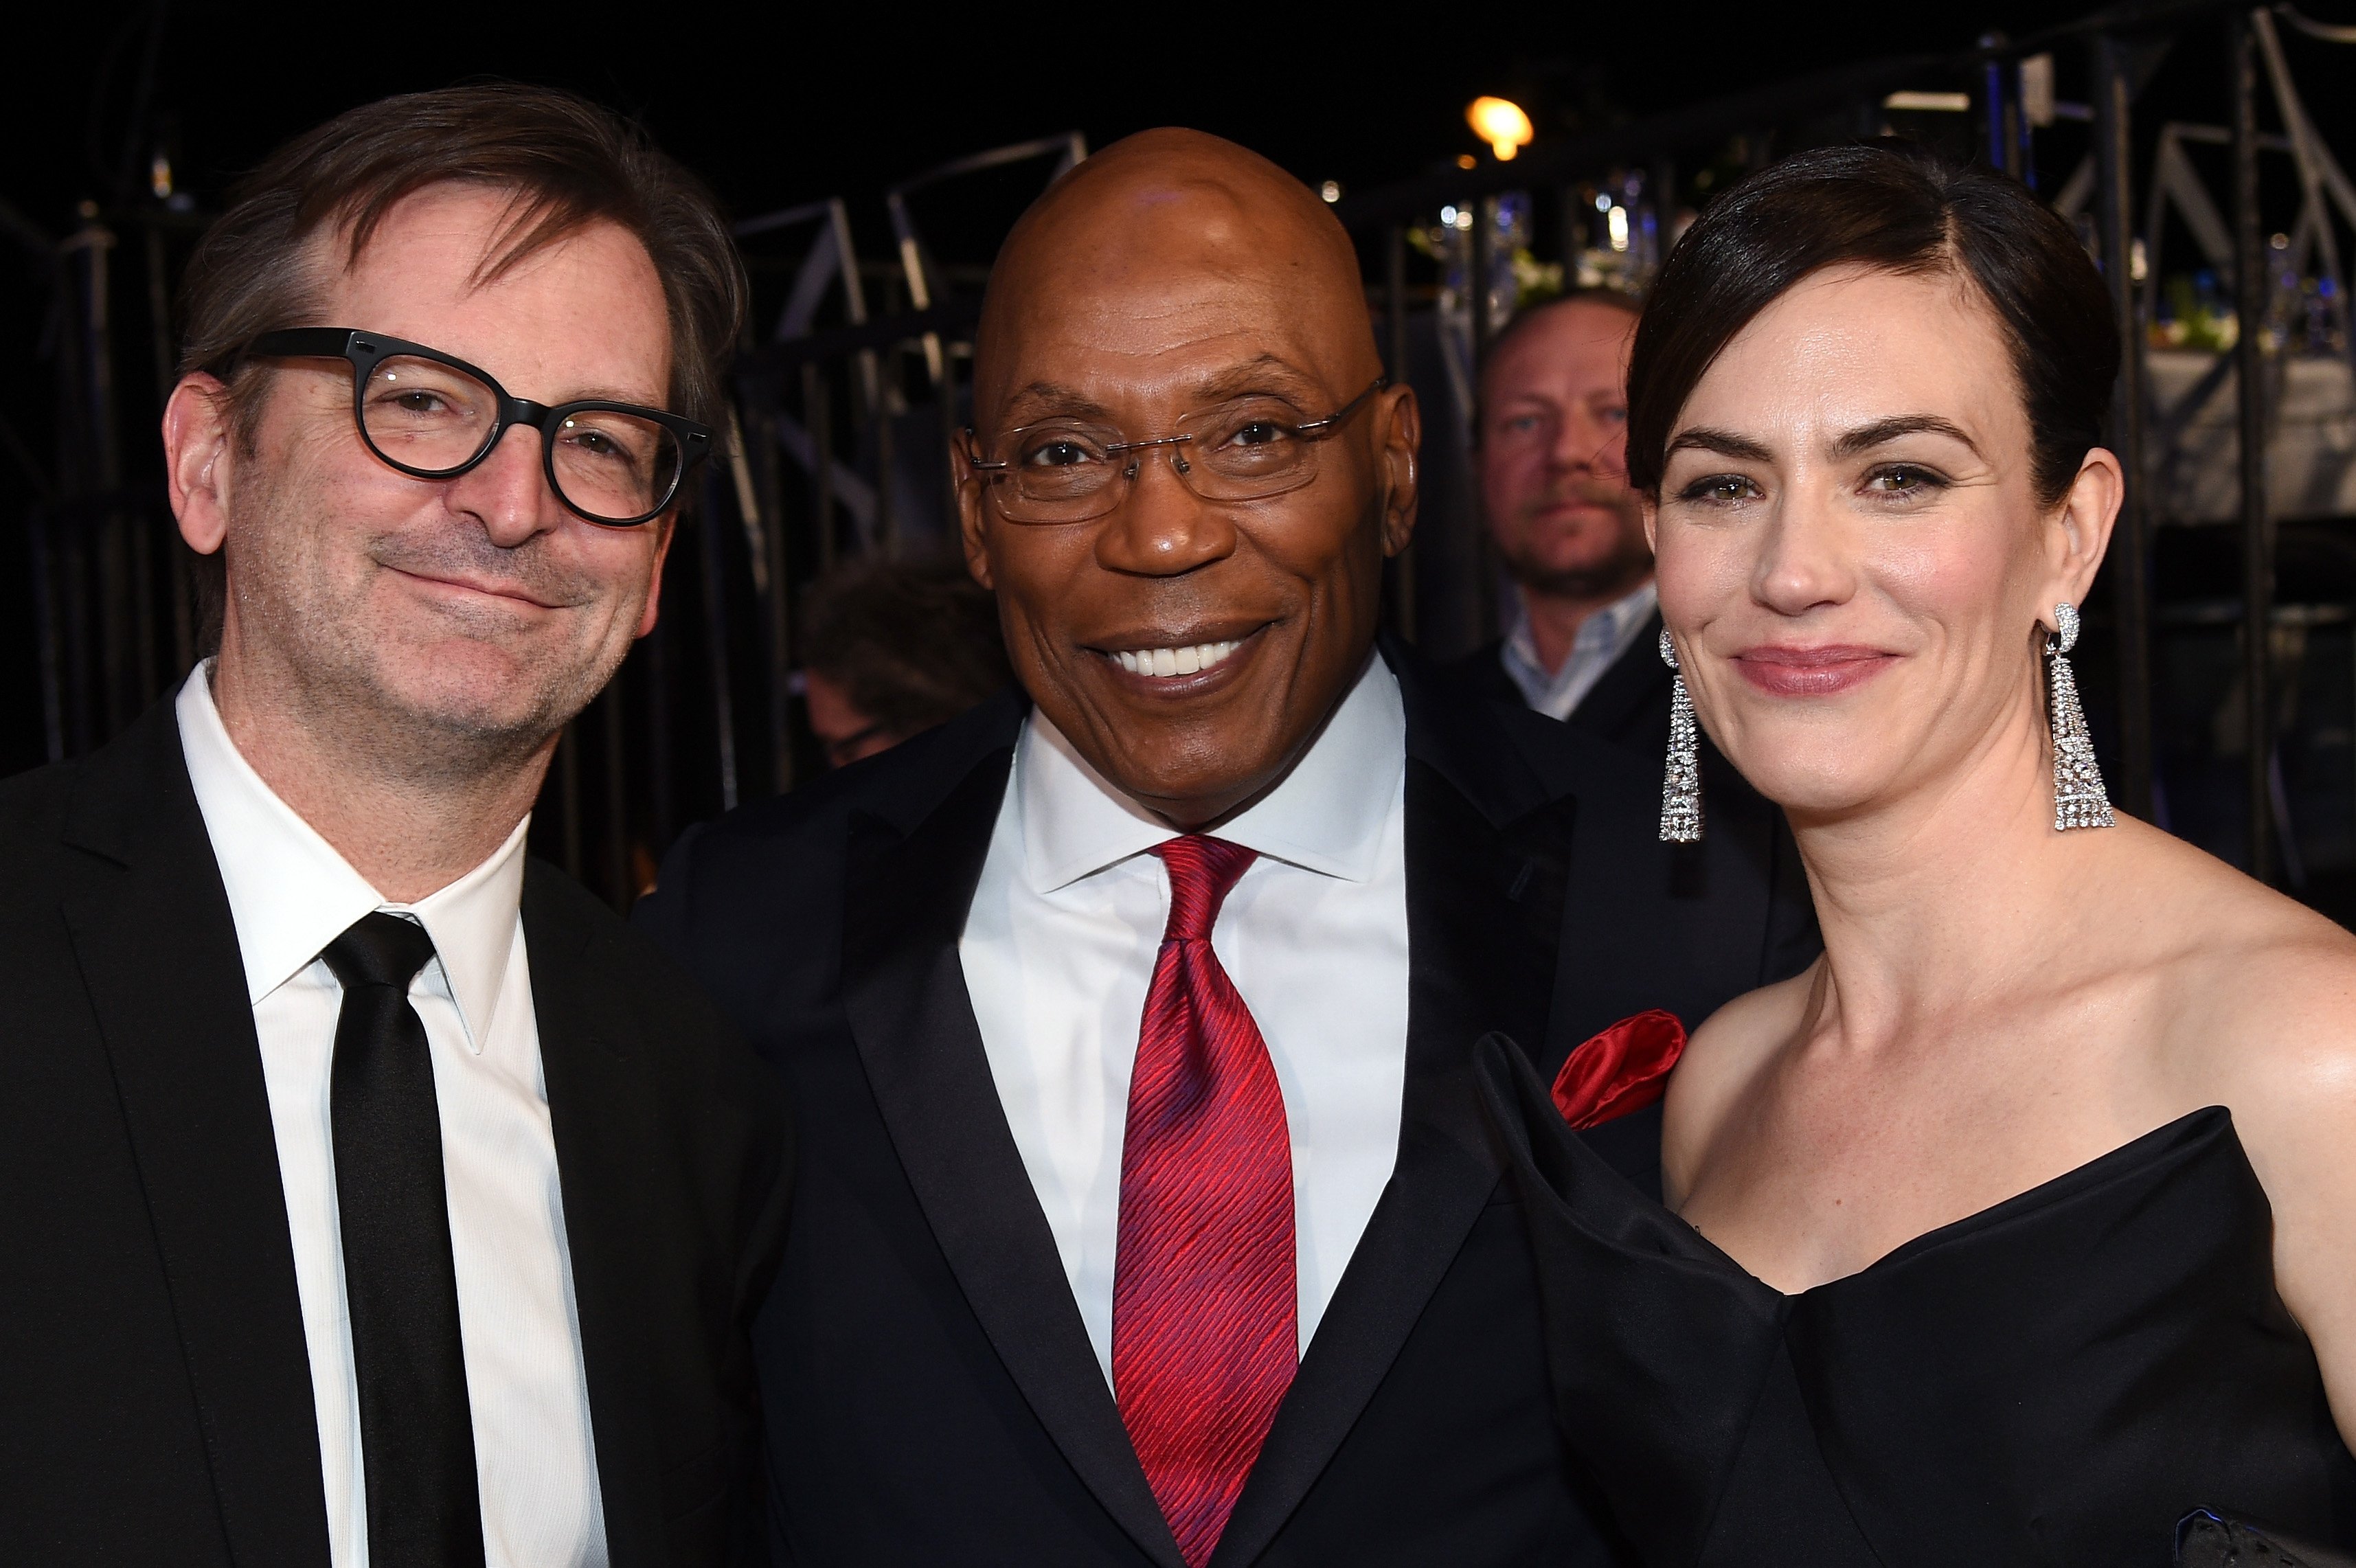 Paul Ratliff, director Paris Barclay (center) and actress Maggie Siff attend the 23rd Annual Screen Actors Guild Awards Cocktail Reception at The Shrine Expo Hall on January 29, 2017, in Los Angeles, California. | Source: Getty Images